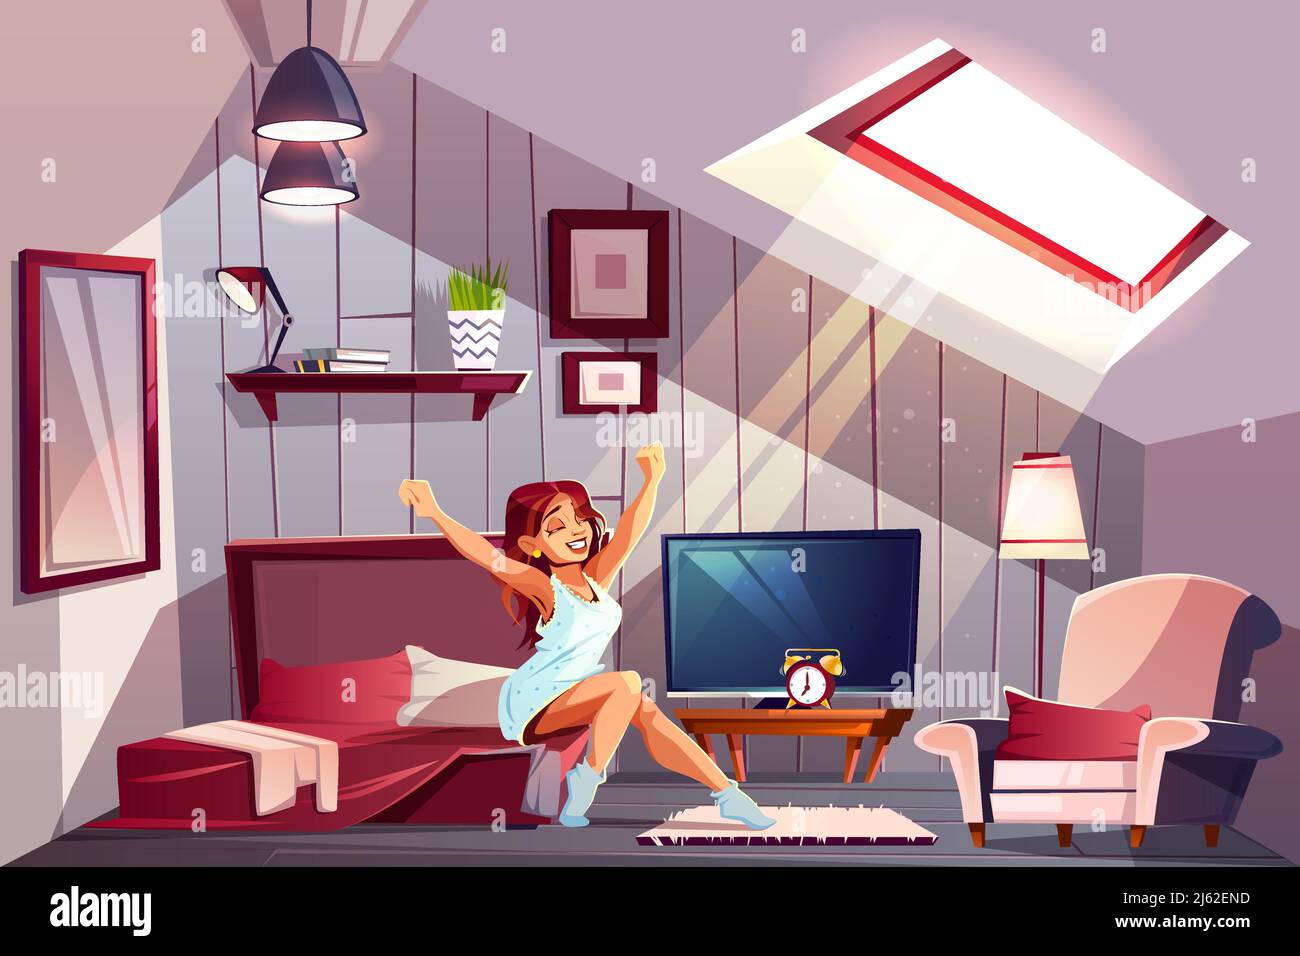 Healthy sleep cartoon vector concept with happy smiling woman in nightie, sitting on bed and stretching after waking up at morning illustration. Comfo Stock Vector